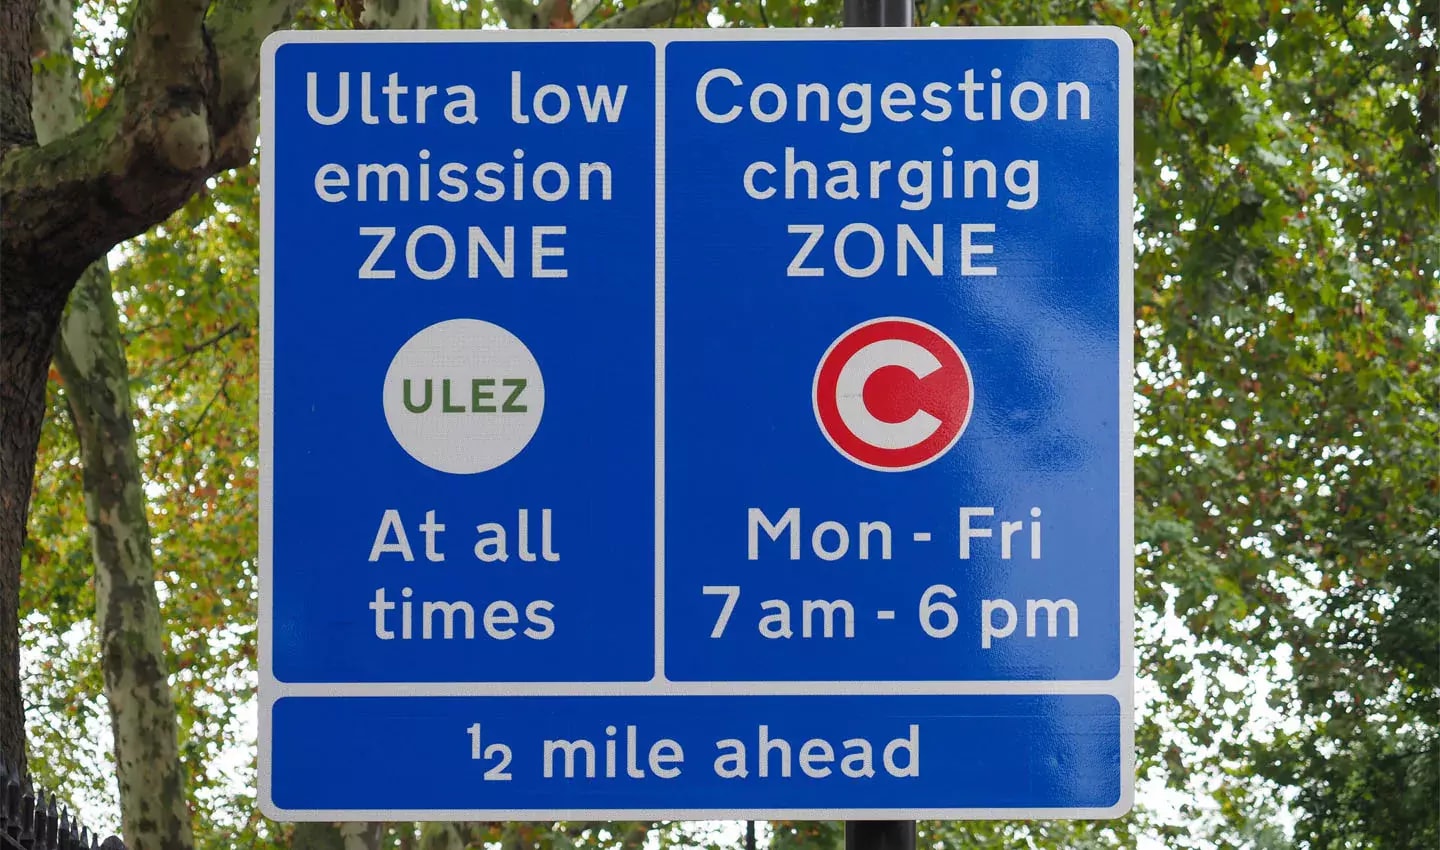 London’s Ultra-Low Emission Zone prevents the most polluting vehicles from entering the center. A congestion charge applies to all vehicles, to reduce traffic volumes.